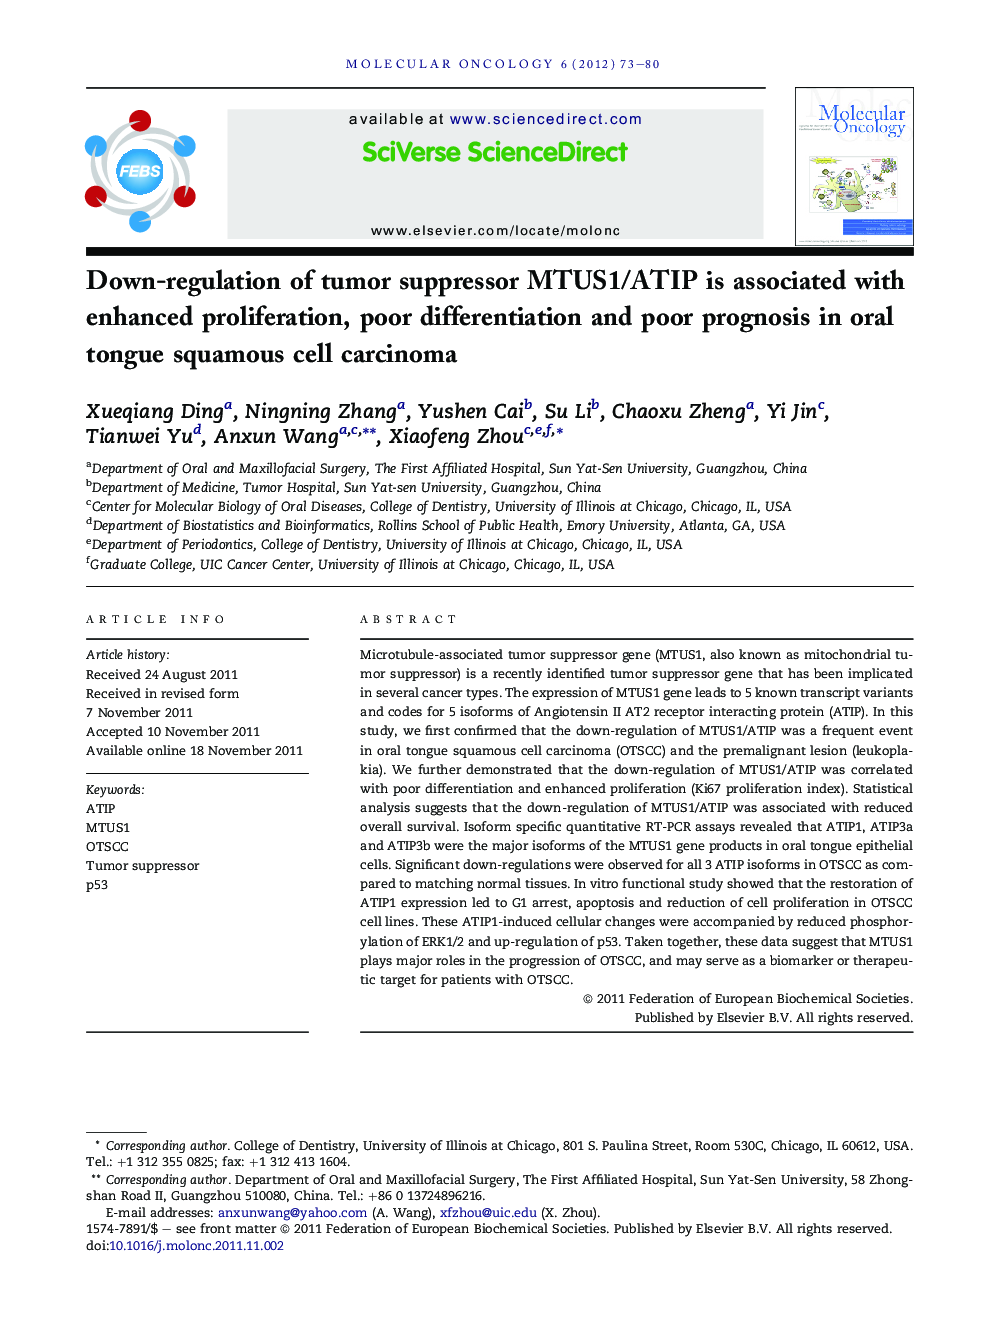 Down-regulation of tumor suppressor MTUS1/ATIP is associated with enhanced proliferation, poor differentiation and poor prognosis in oral tongue squamous cell carcinoma